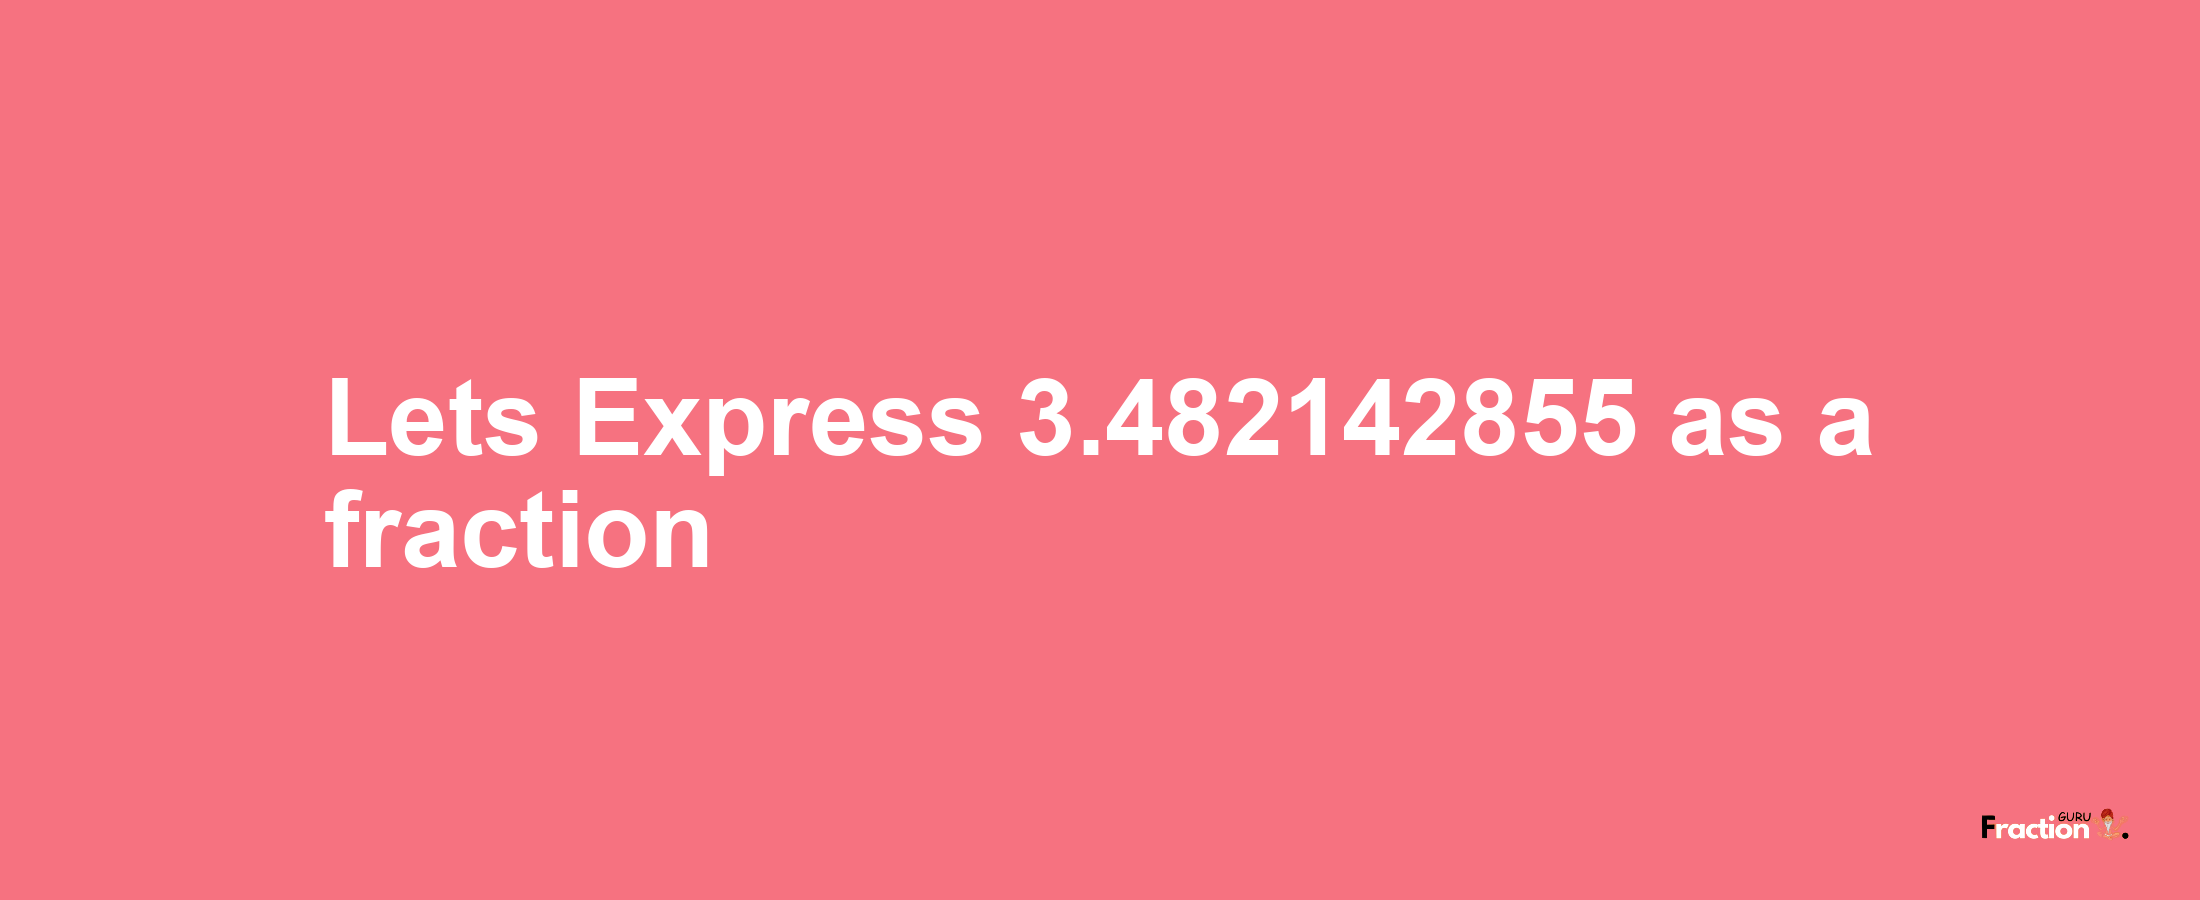 Lets Express 3.482142855 as afraction